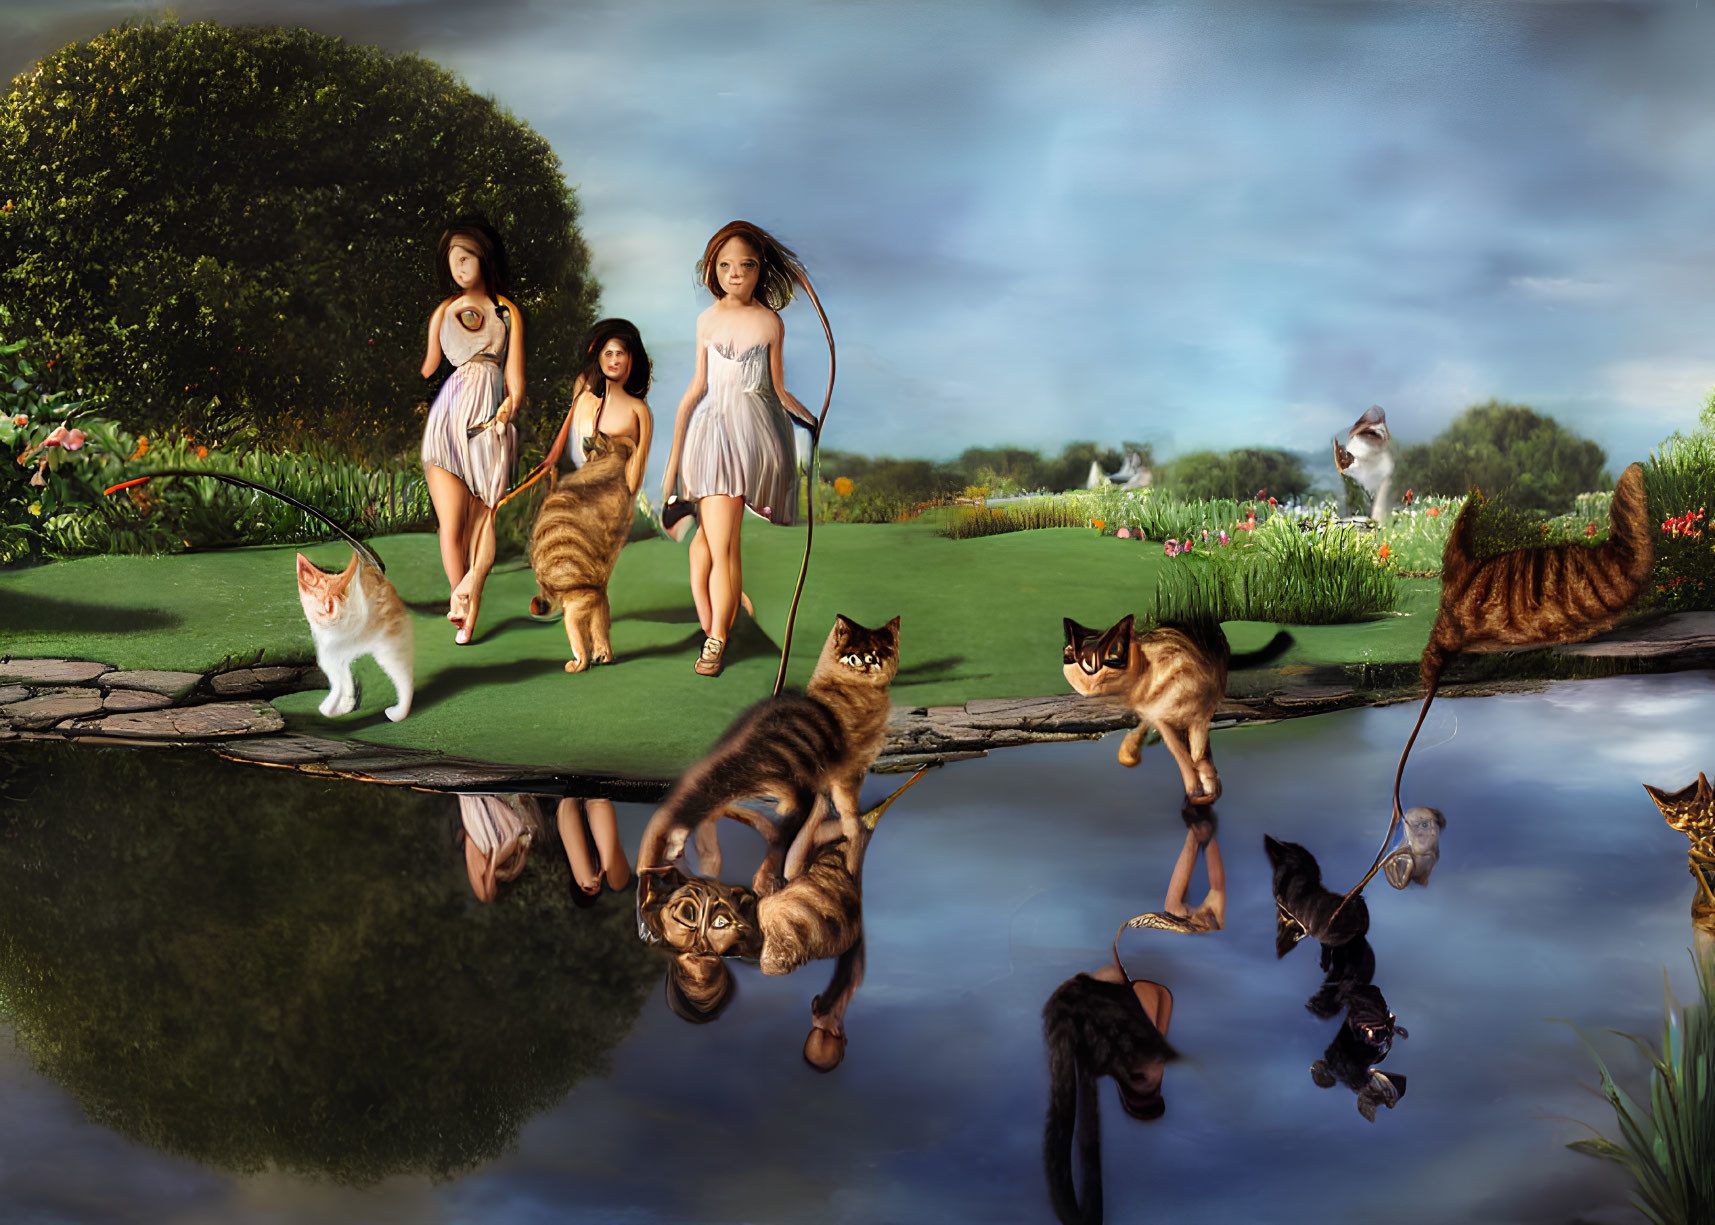 Girls walking on stone path near pond with cats, greenery, flowers, and reflections under blue sky